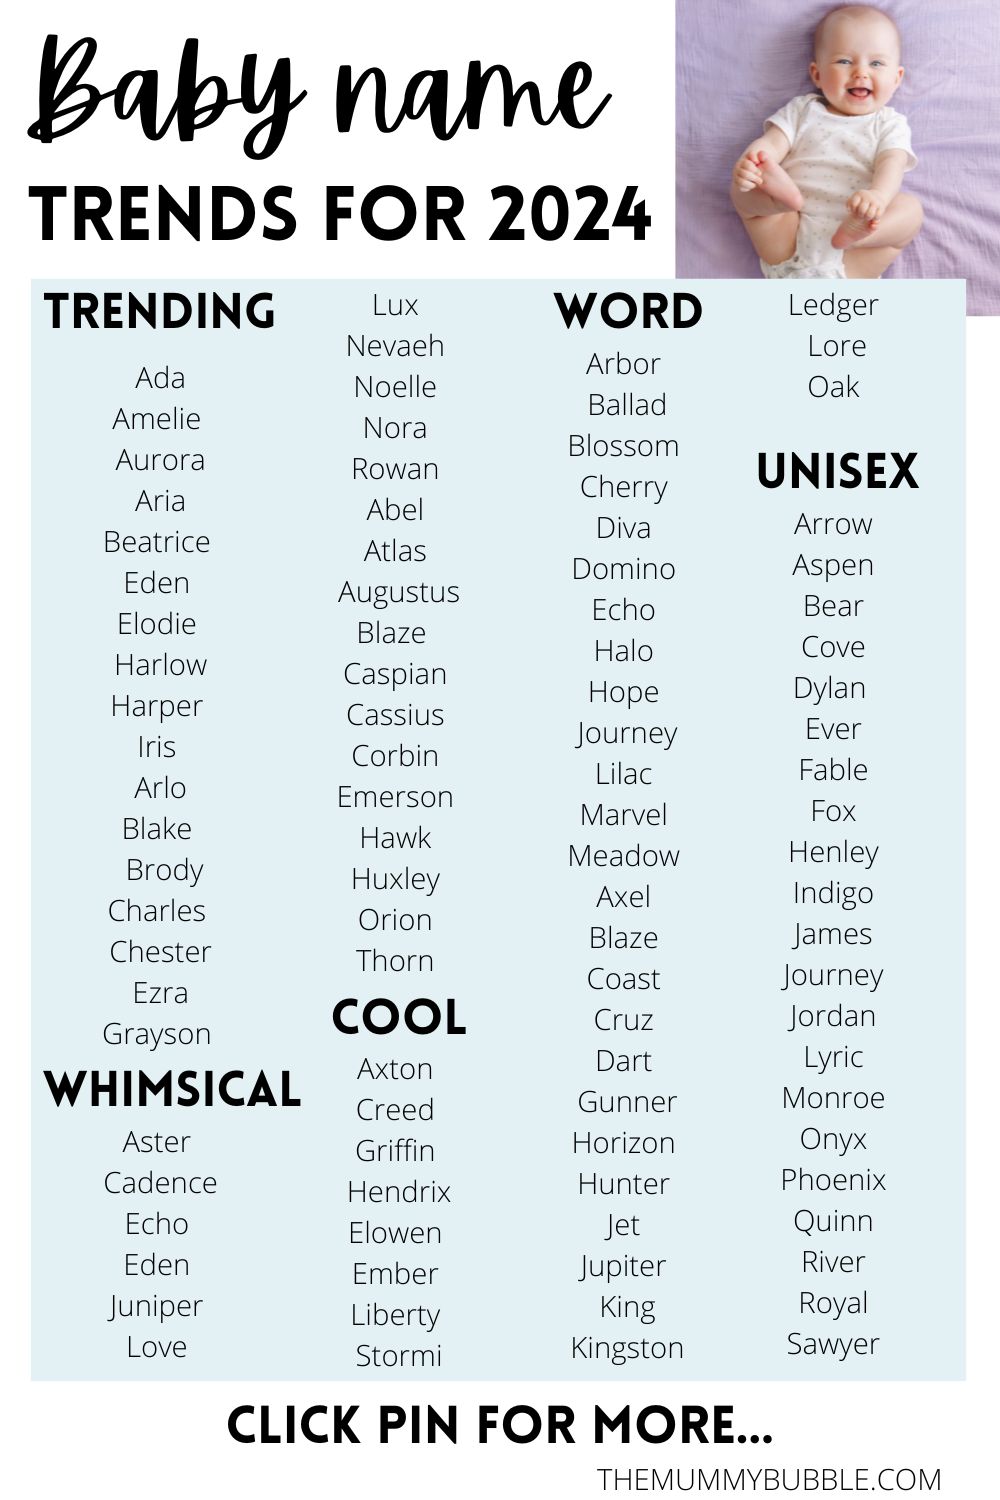 Baby name trends for 2024